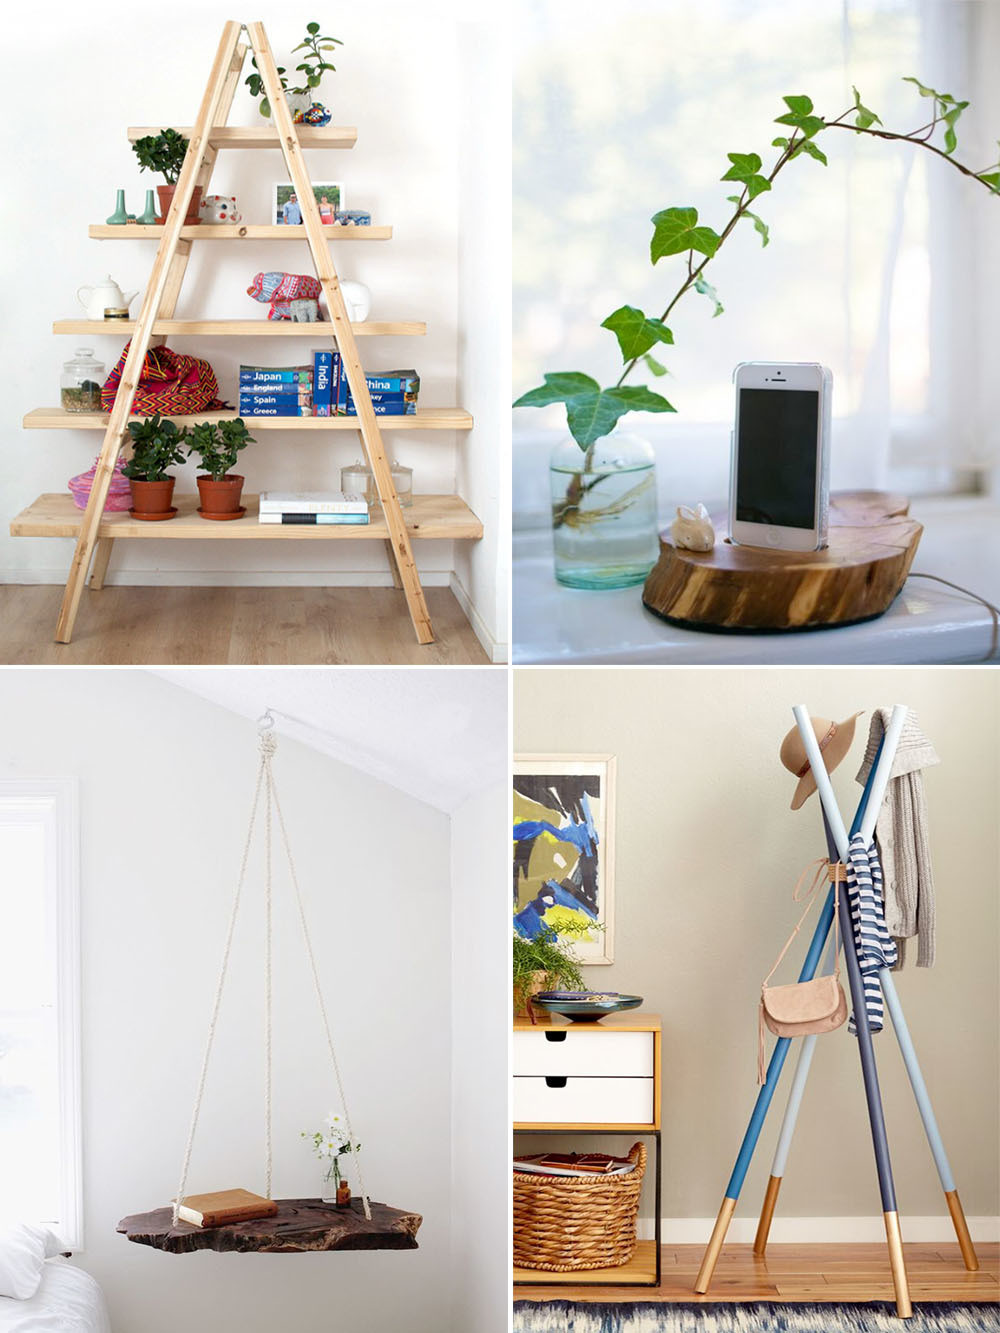 Diy Wood Projects
 Roundup 10 Beginner Woodworking Projects Using Basic